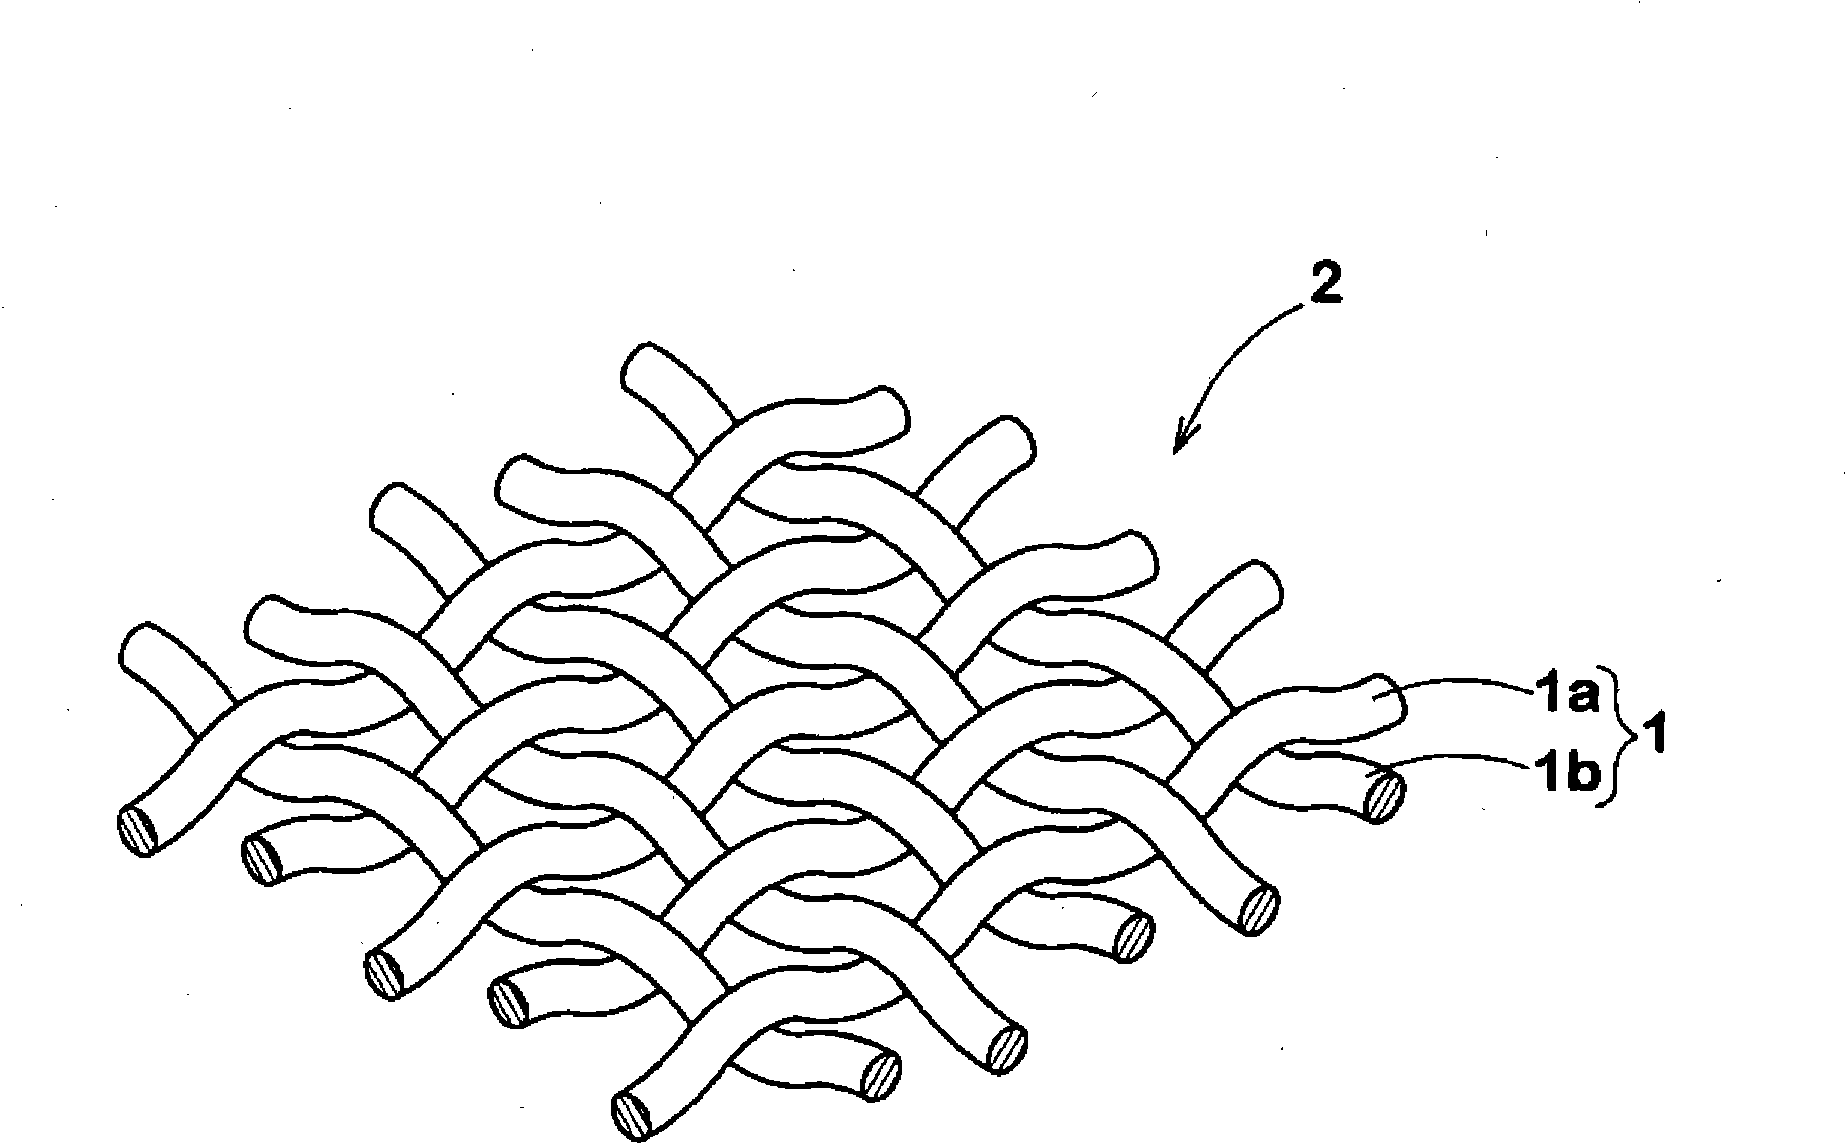 Metal ultrafine wire, process for production of metal ultrafine wire, and mesh wire netting using metal ultrafine wire